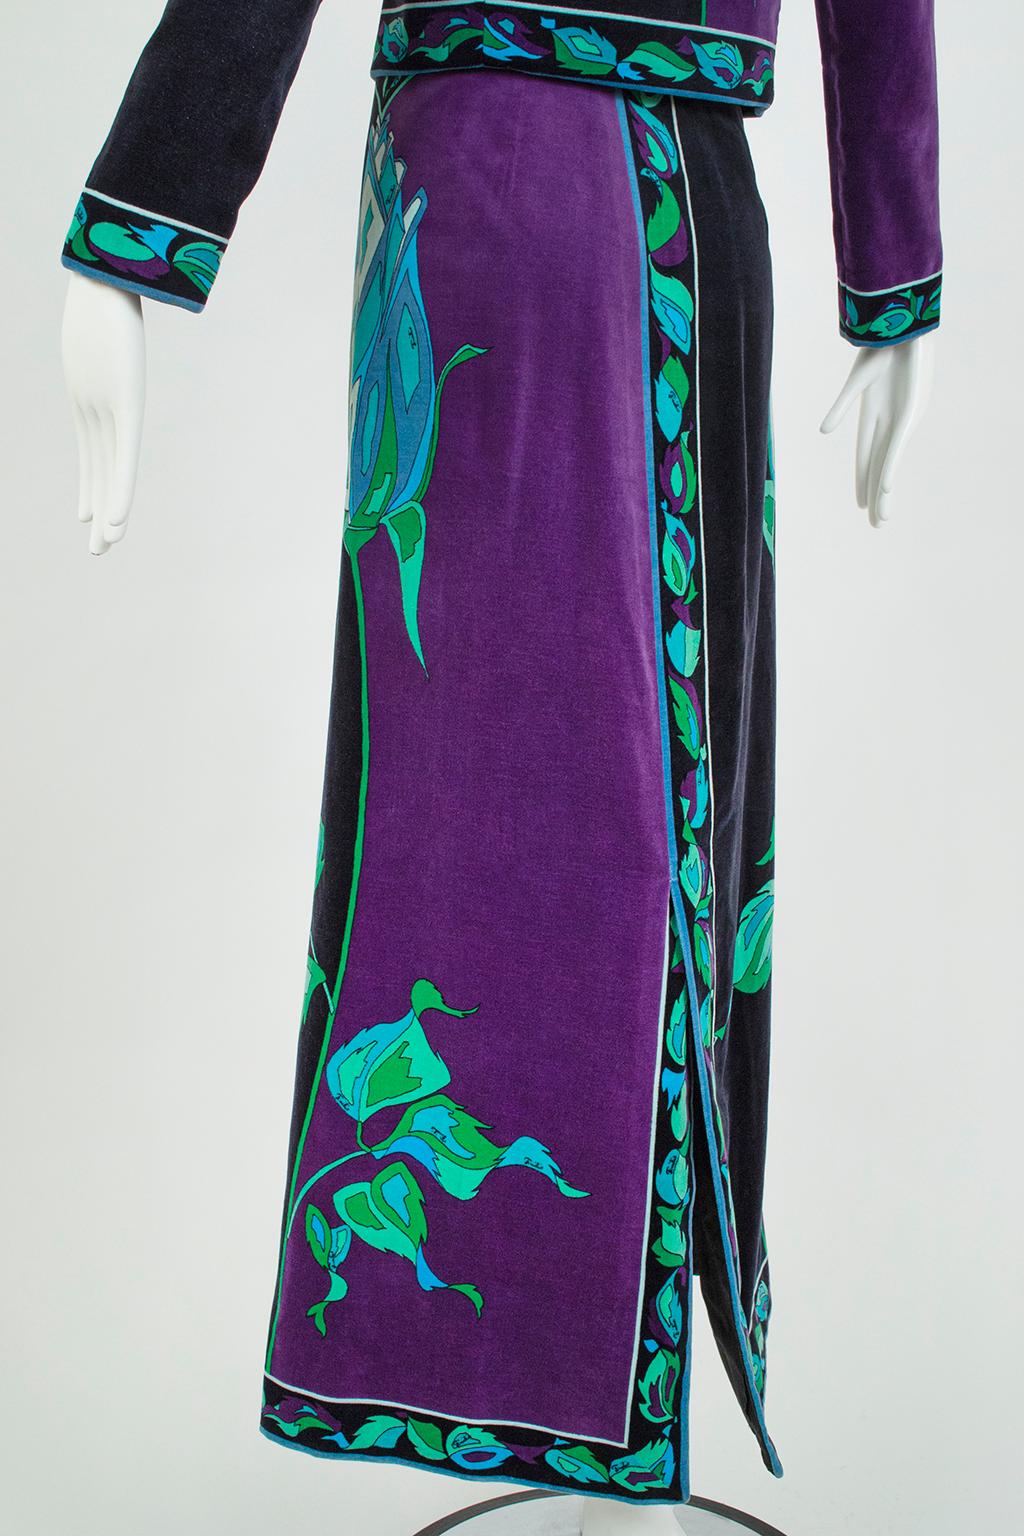 Emilio Pucci Black and Purple Rose Velvet Jacket and Maxi Skirt, Saks – S, 1971 For Sale 10